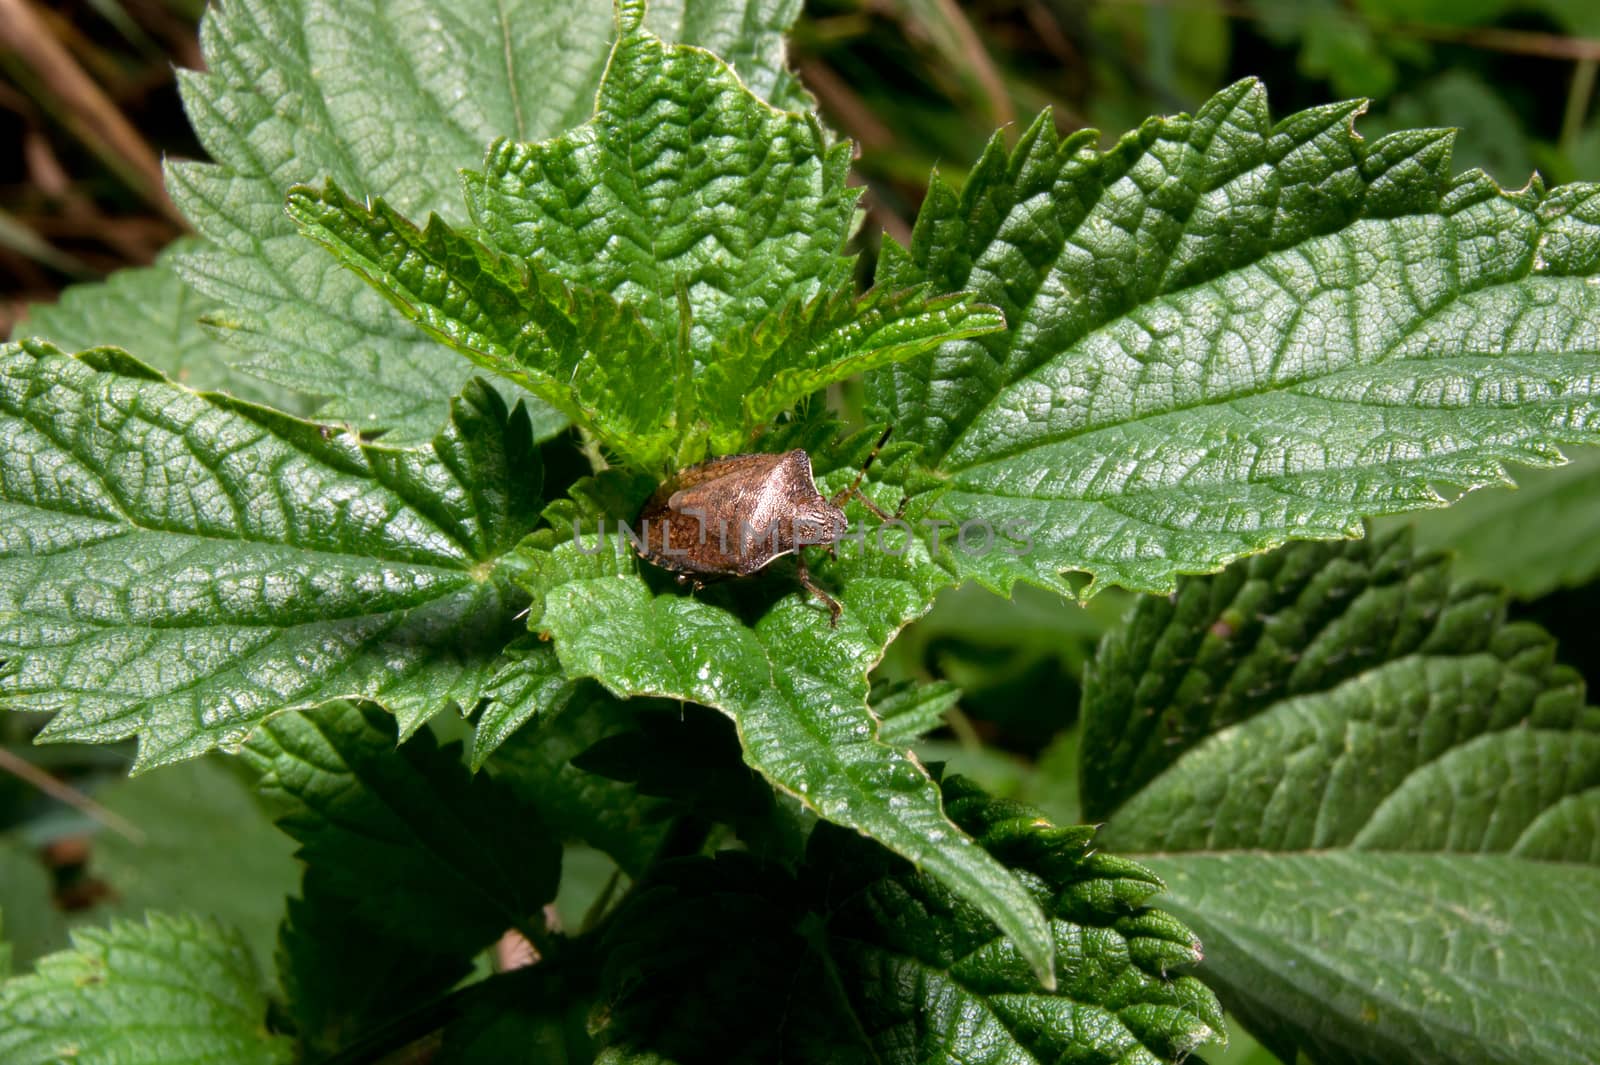 The seven-spotted ladybug (Coccinella septempunctata) resting on a nettle